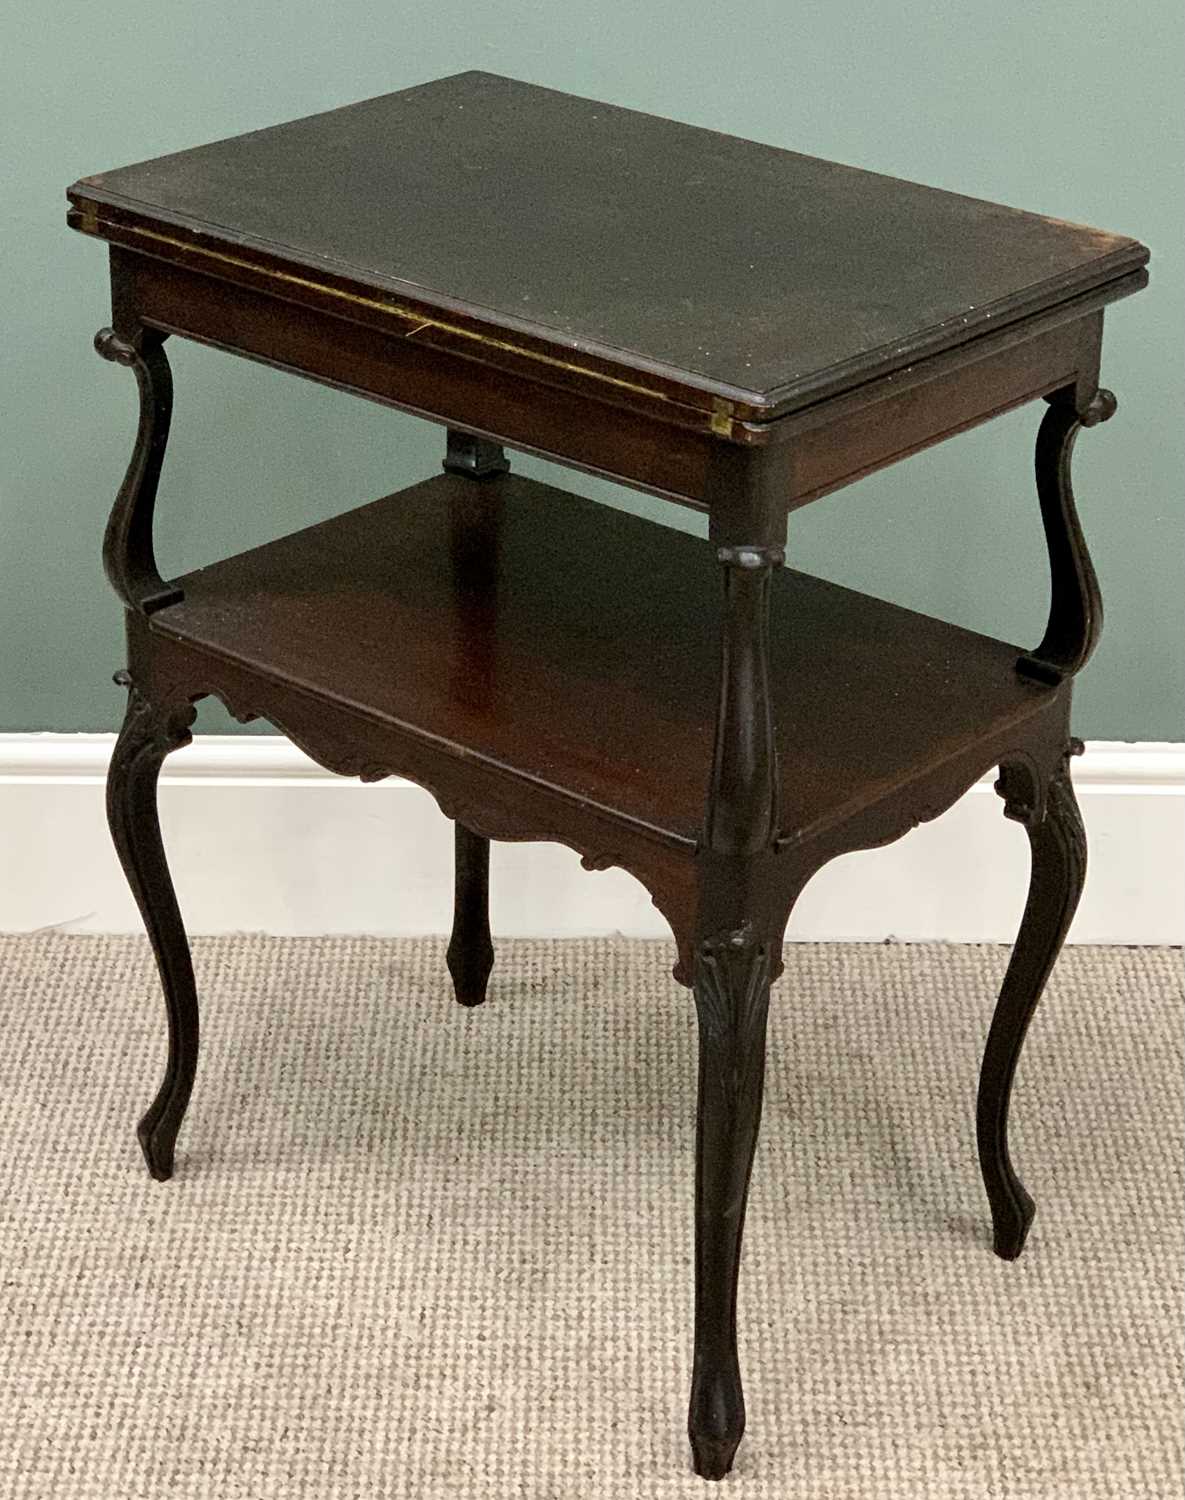 EDWARDIAN MAHOGANY FOLDOVER CARD TABLE - having an interior baize lining with gilt tooled edging and - Image 5 of 6